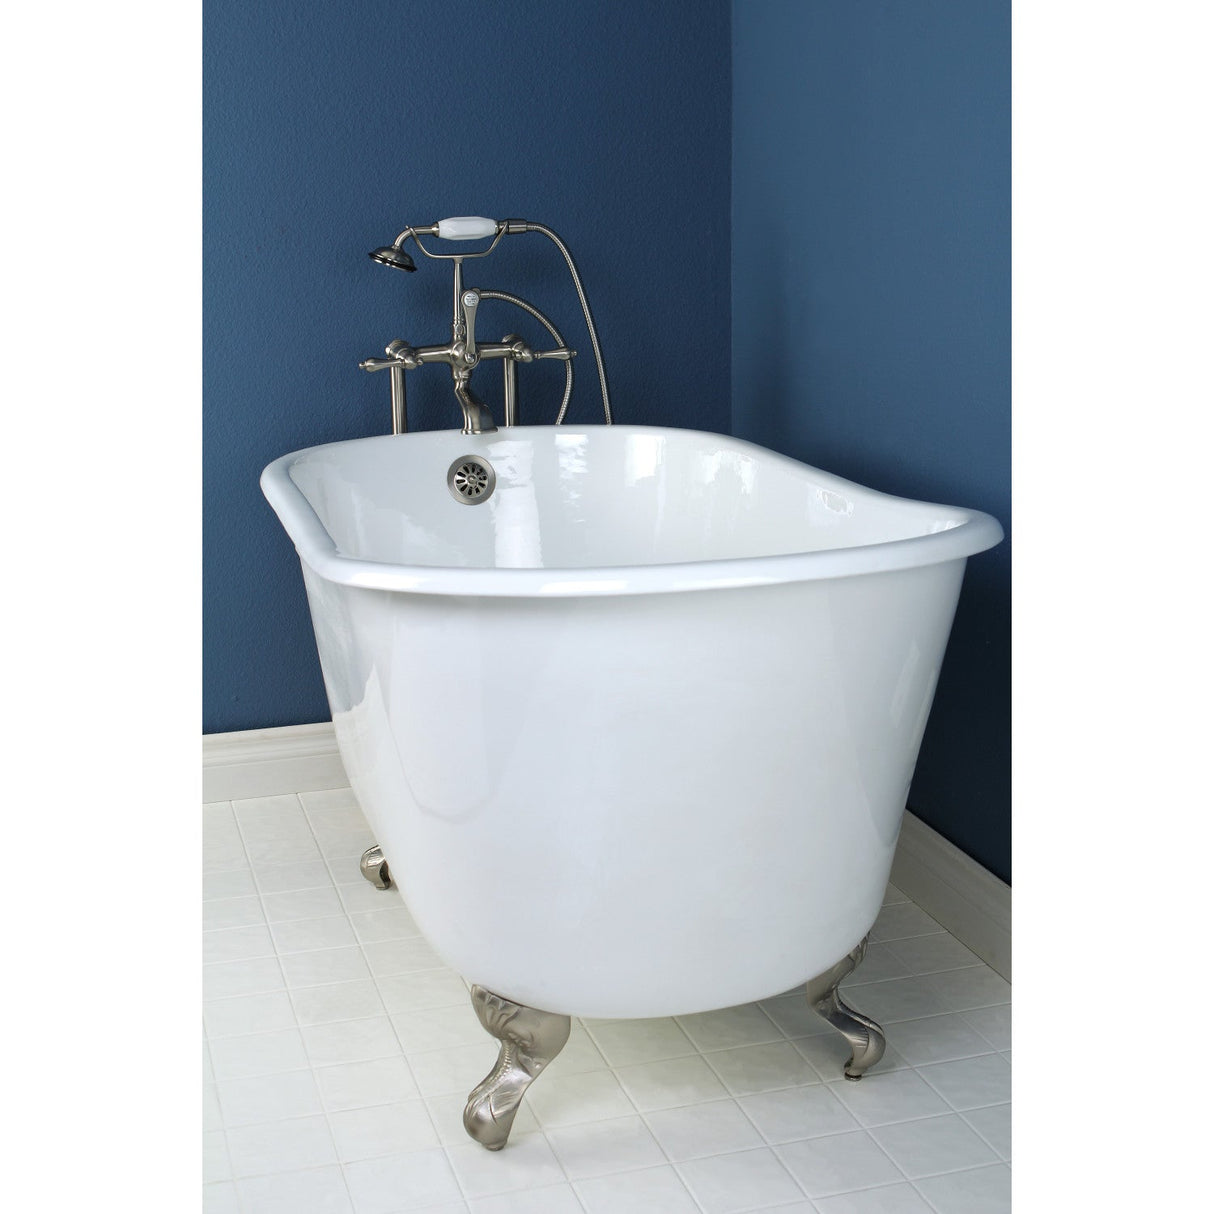 Onamia VCTND4828NT8 48-Inch Cast Iron Single Slipper Clawfoot Tub (No Faucet Drillings), White/Brushed Nickel